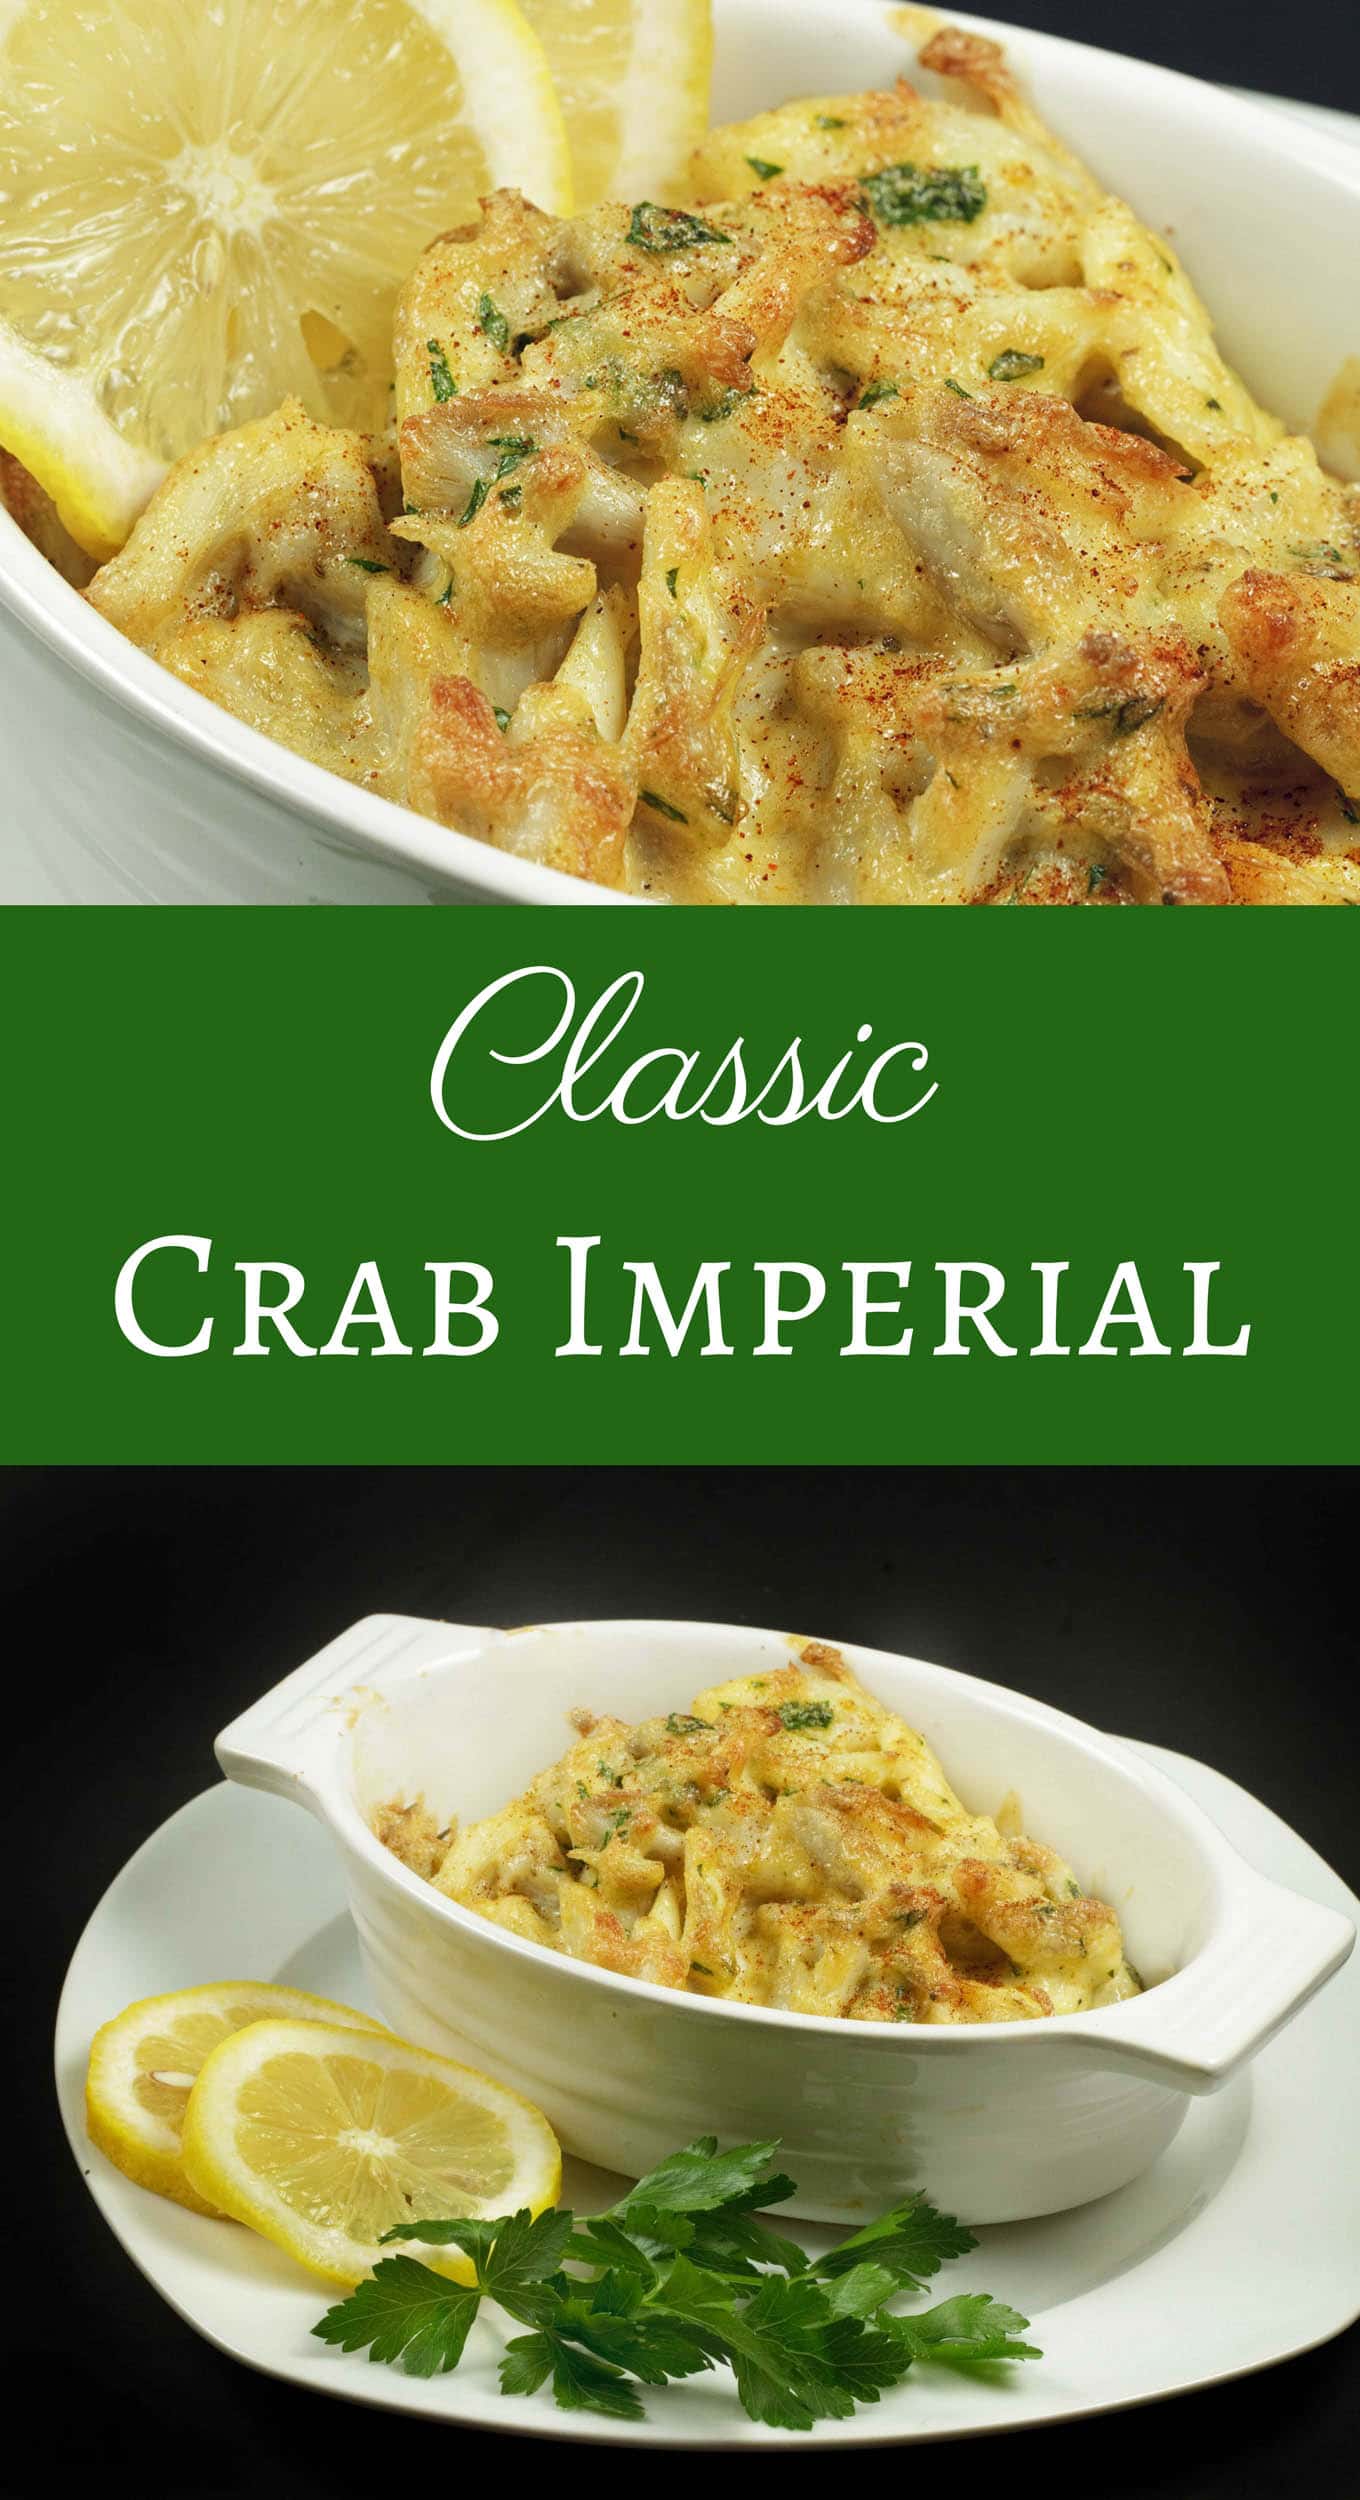 Maryland Jumbo Lump Crab Imperial Recipe - A Timeless Classic